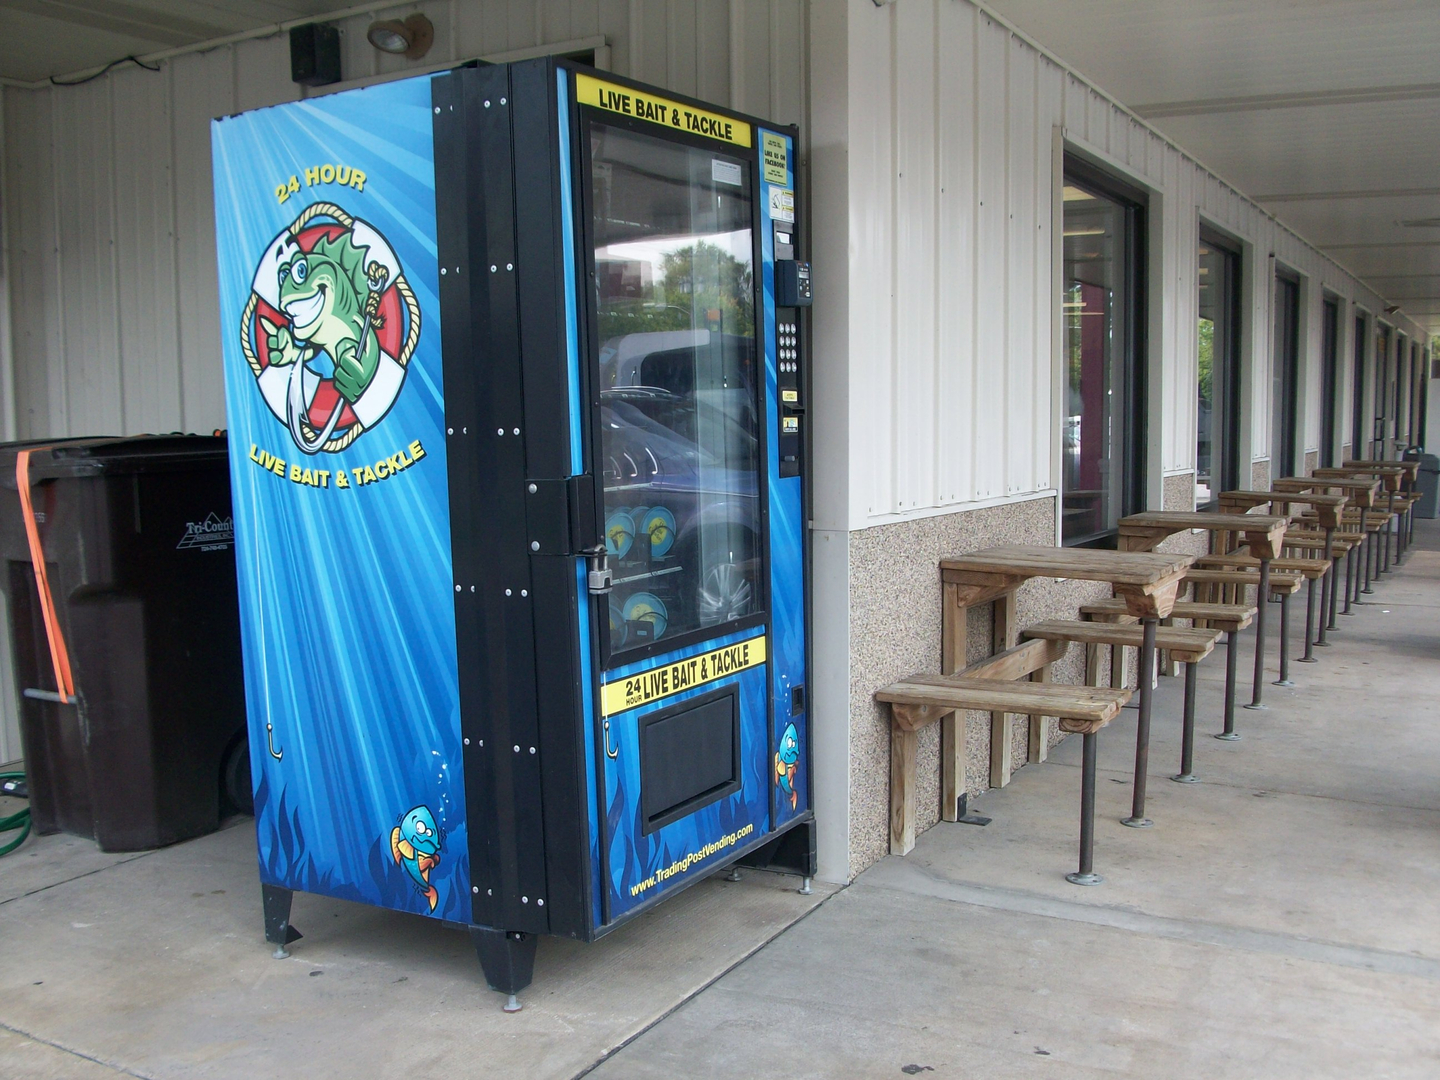 Live Bait and Tackle Vending Machines - After Hours Live Bait Vending